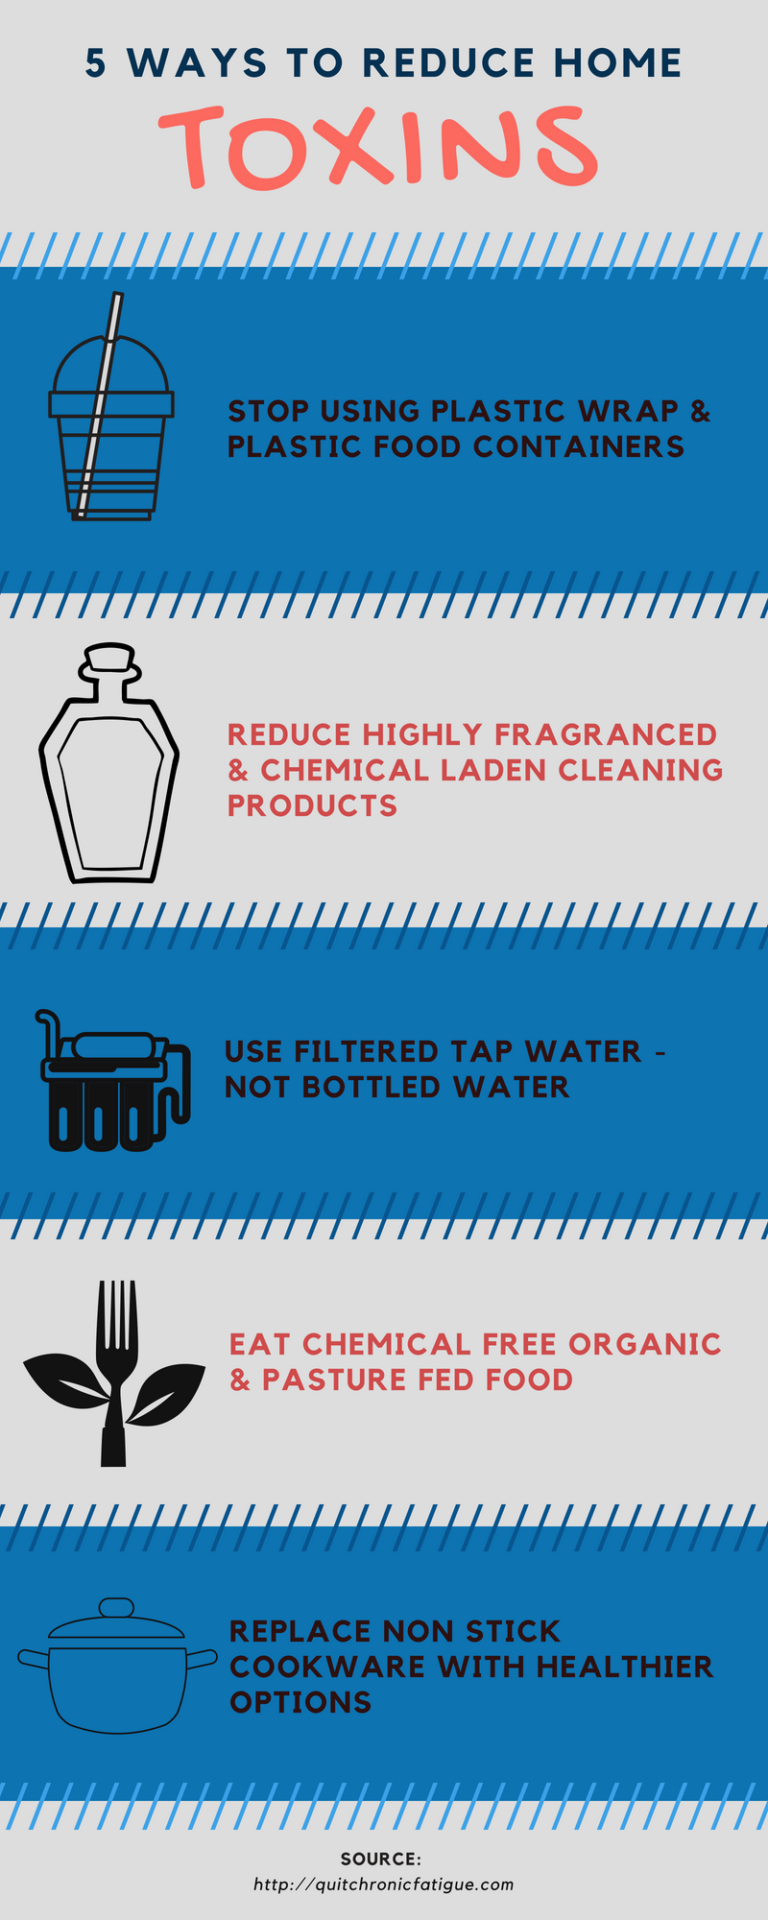 How to reduce toxins in your home – 5 Easy Ways  #infographic